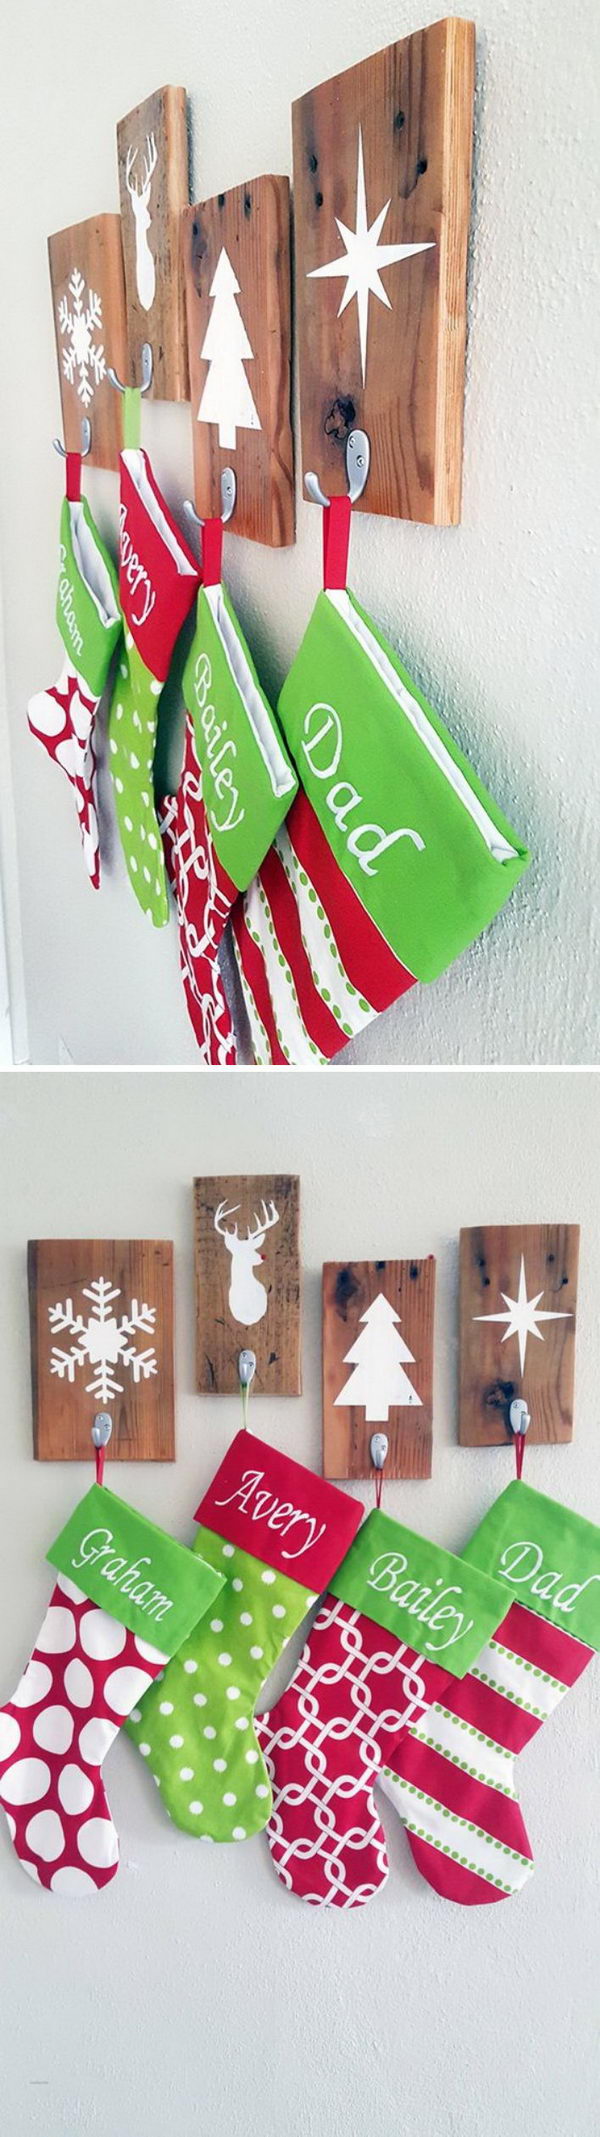 30 Diy Stocking Holders For Christmas Decoration Hative